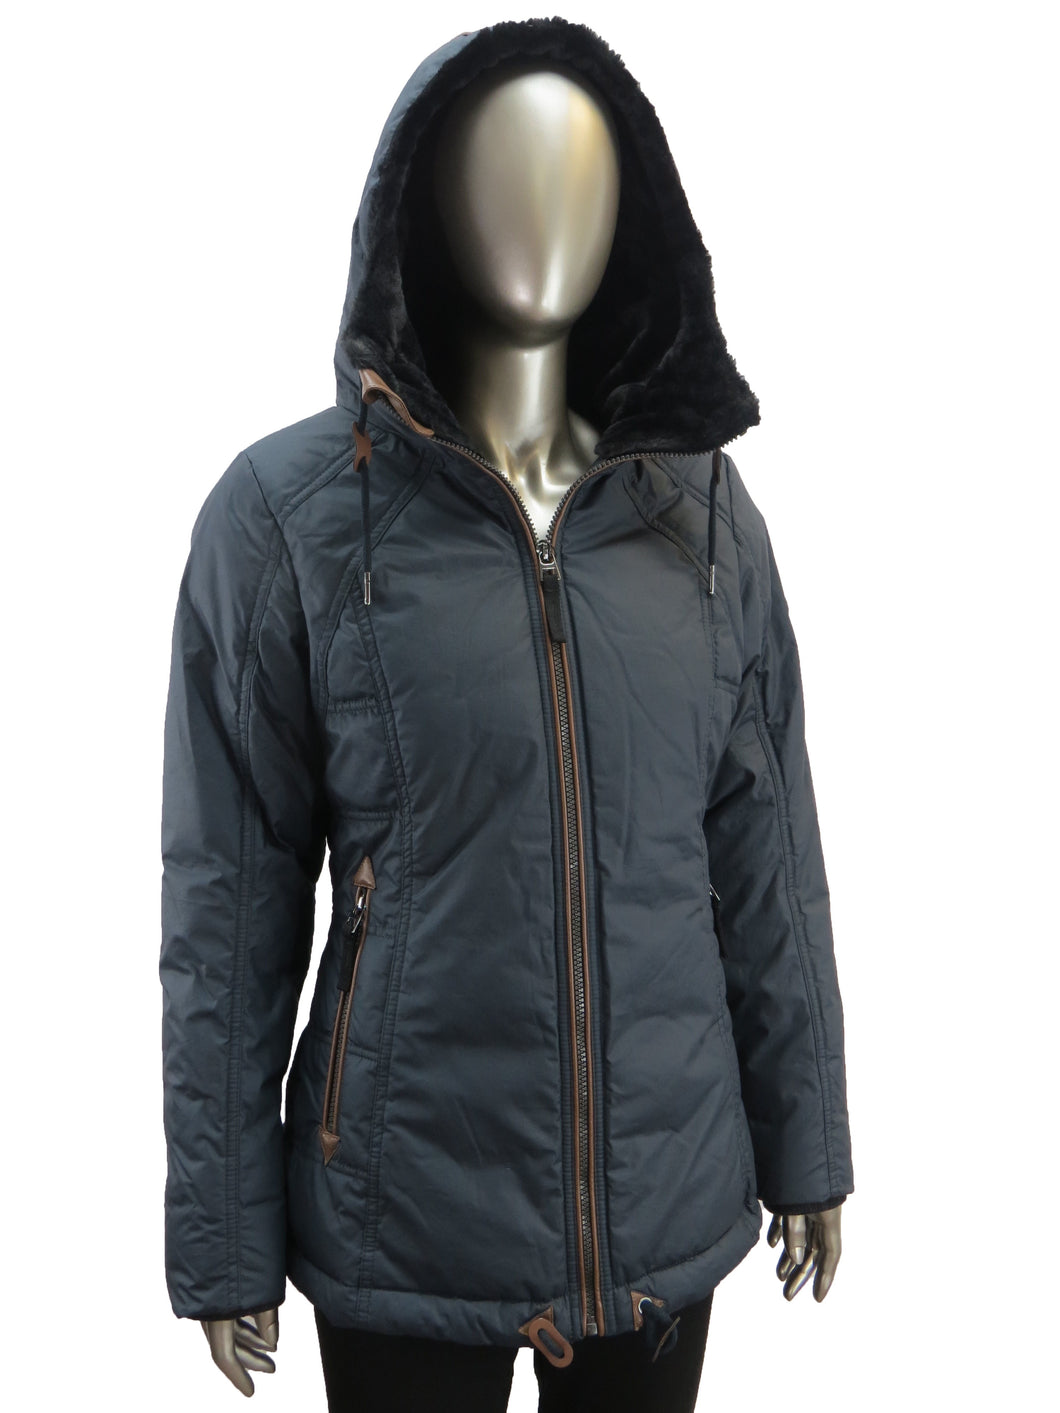 Women's | Junge | 2631-46 | Insulated Down Jacket | Navy